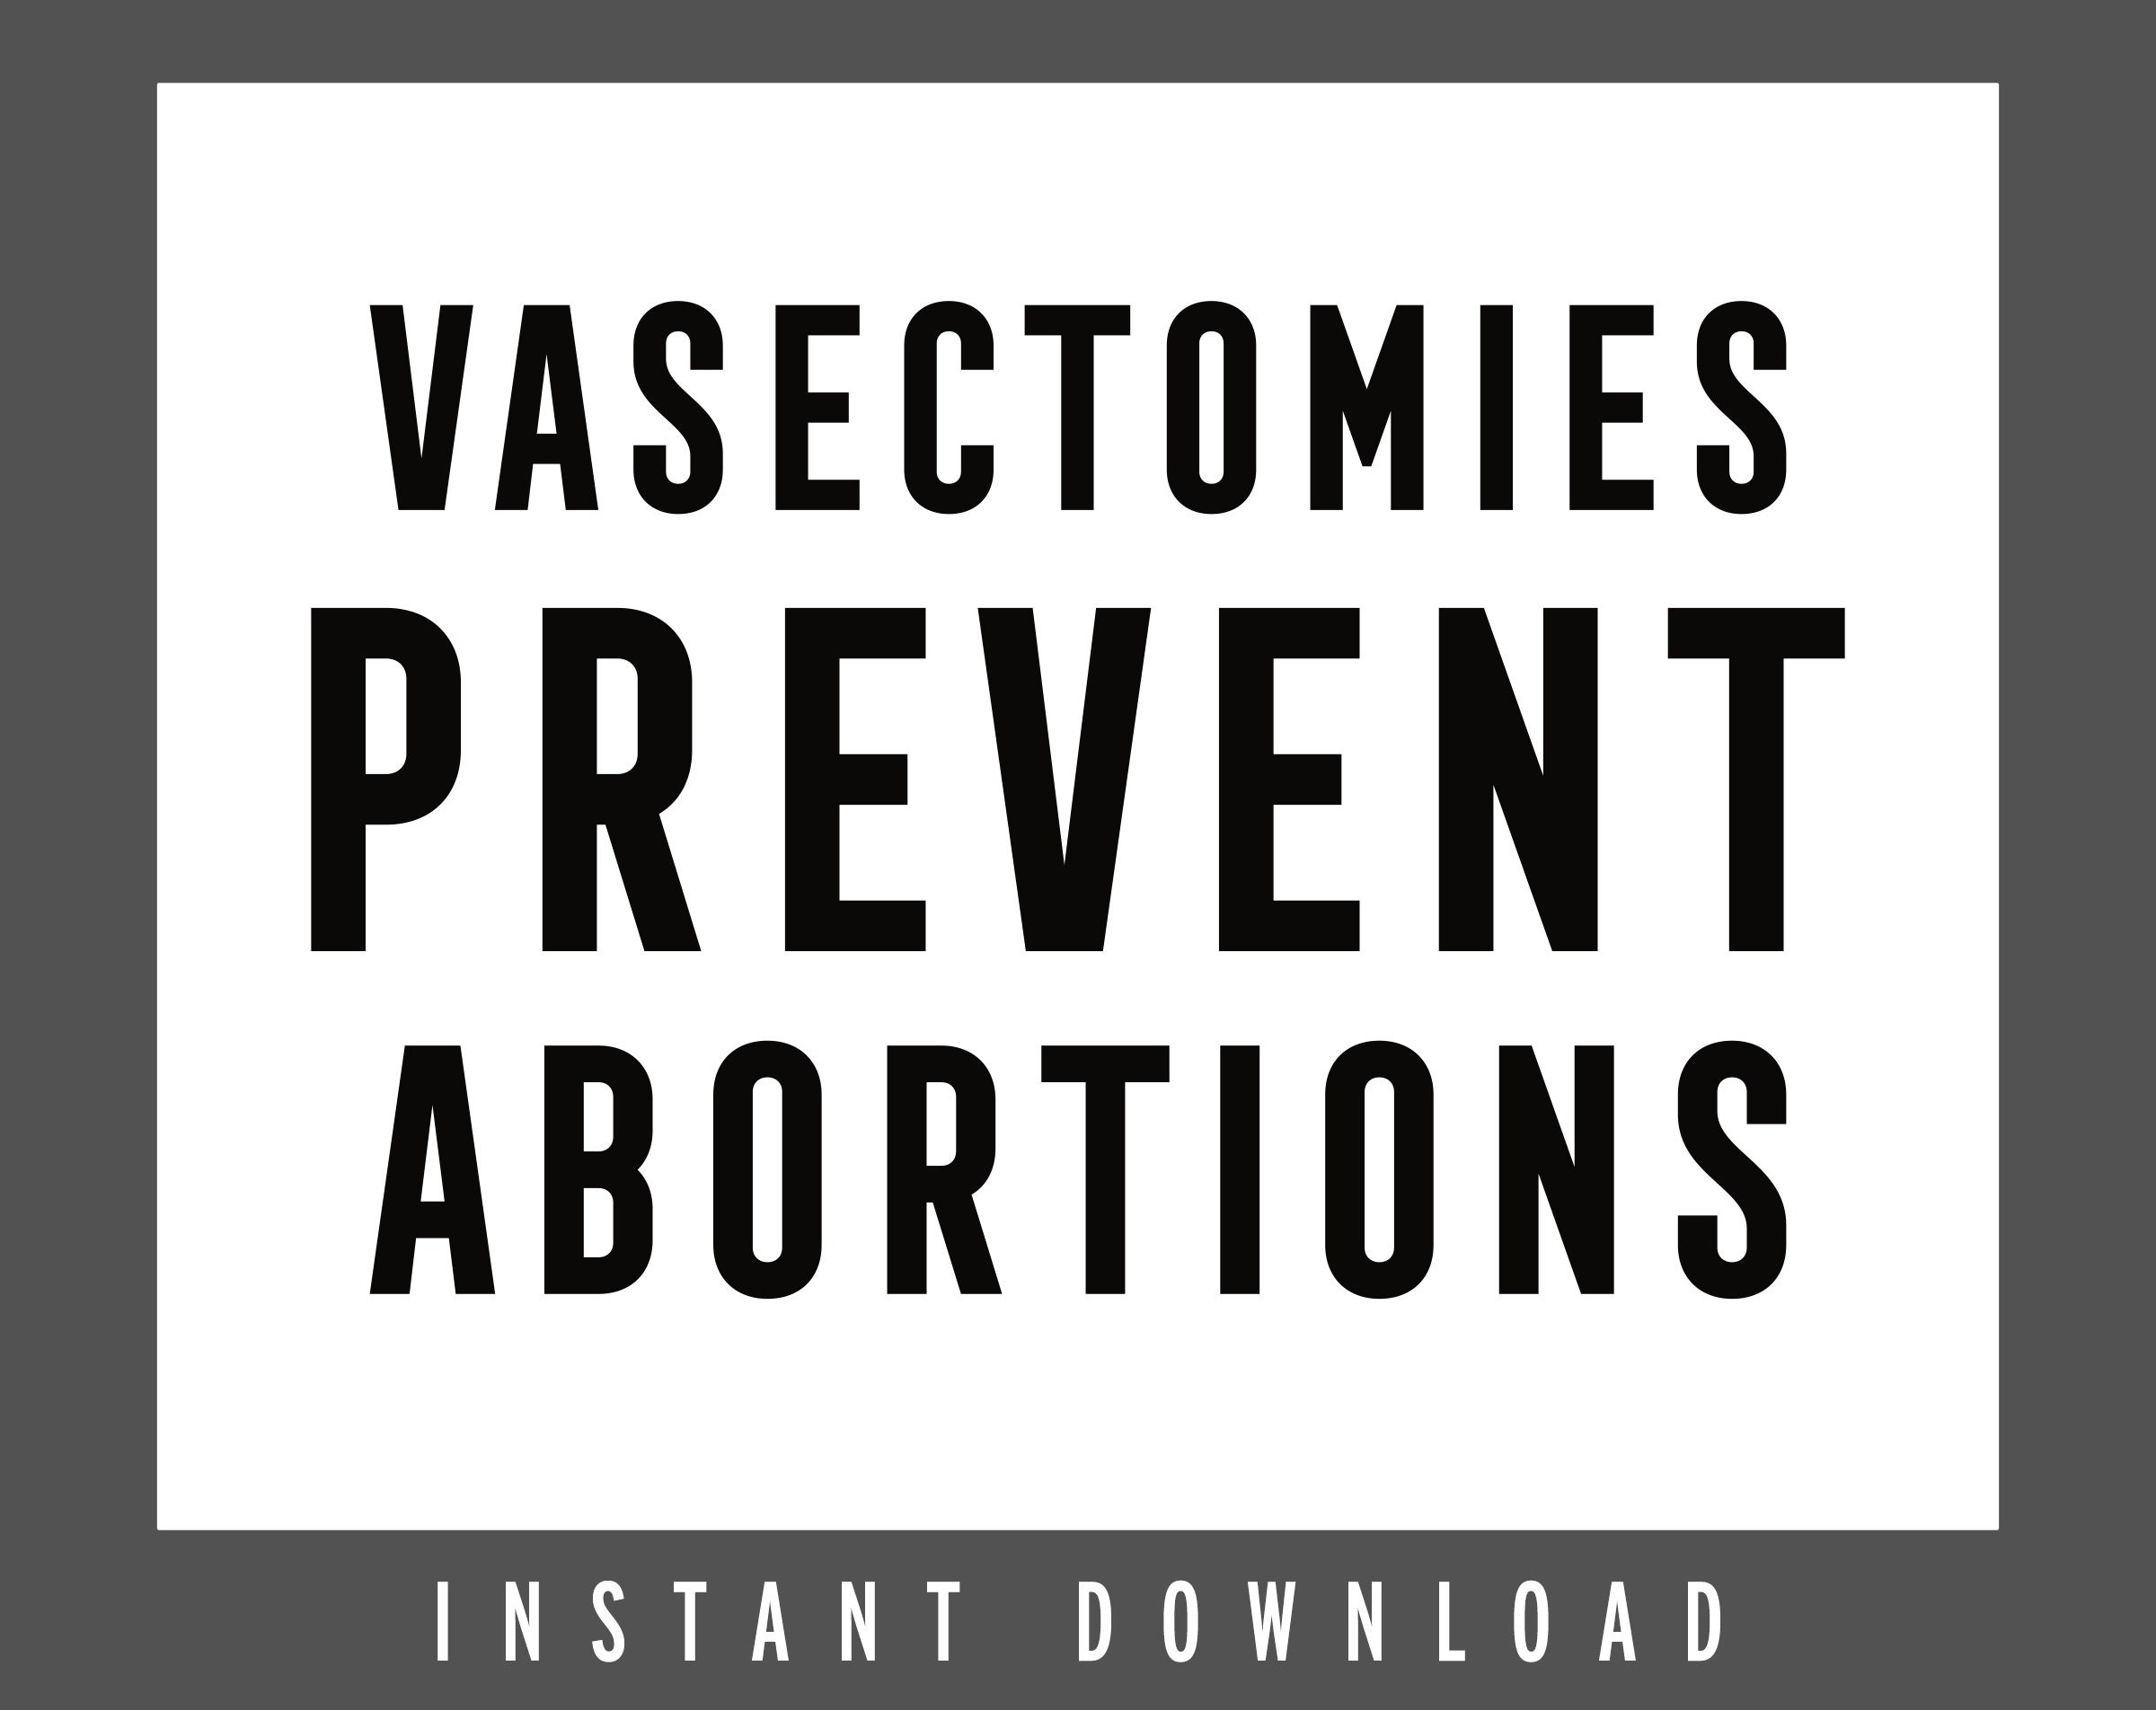 Vasectomies Prevent Abortions, PRINTABLE, pro-choice, feminist poster, pro choice, womens rights sign